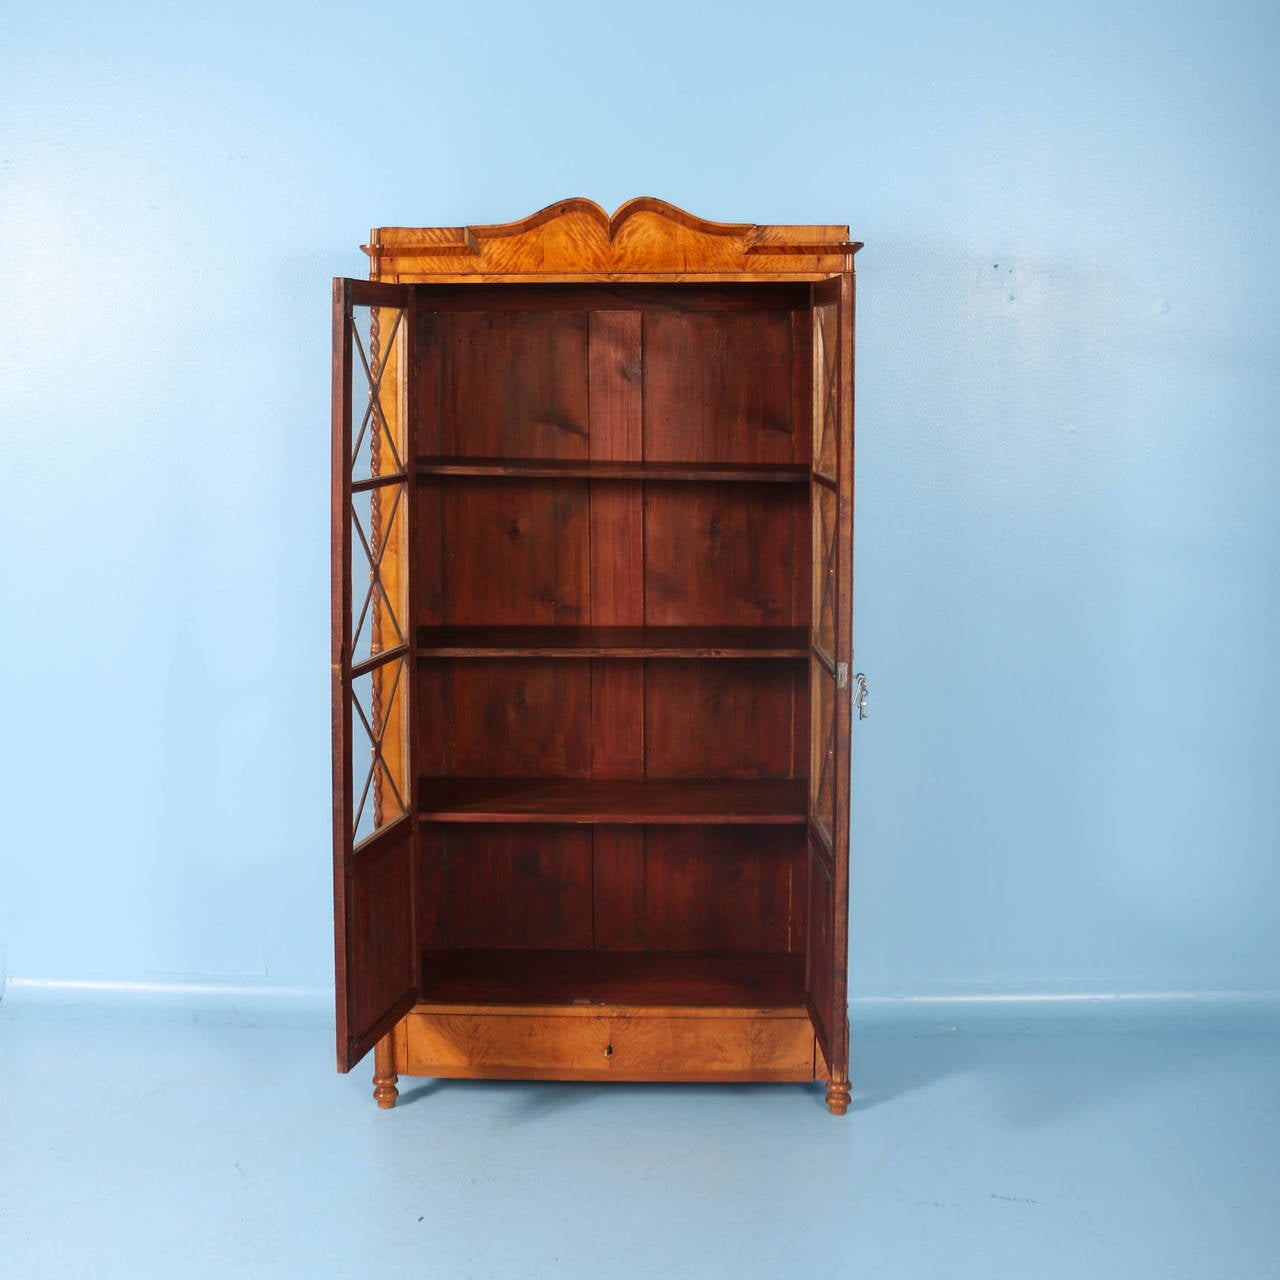 Flaming birch, two-door original Biedermeier bookcase (also know as Karl Johan), from 1830-1850. Please examine the close up photos to appreciate the twisted columns and 